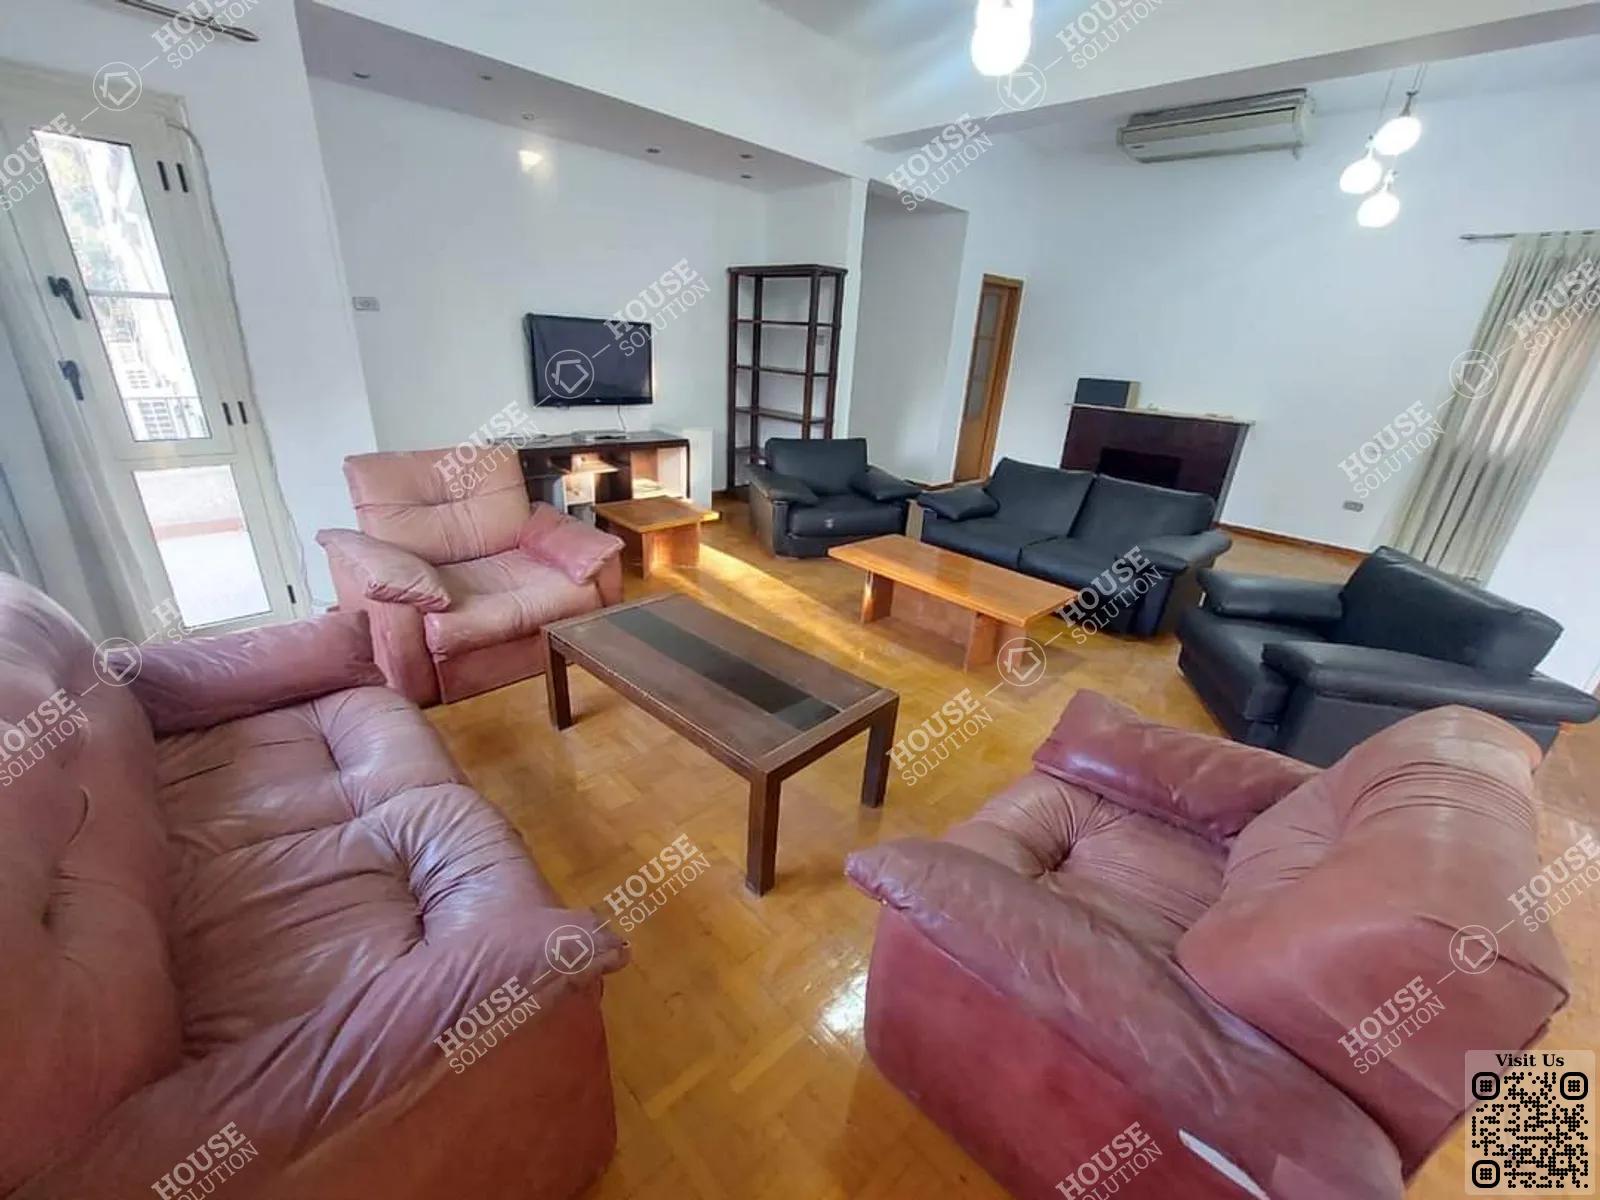 RECEPTION  @ Apartments For Rent In Maadi Maadi Sarayat Area: 240 m² consists of 4 Bedrooms 3 Bathrooms Furnished 5 stars #5859-0